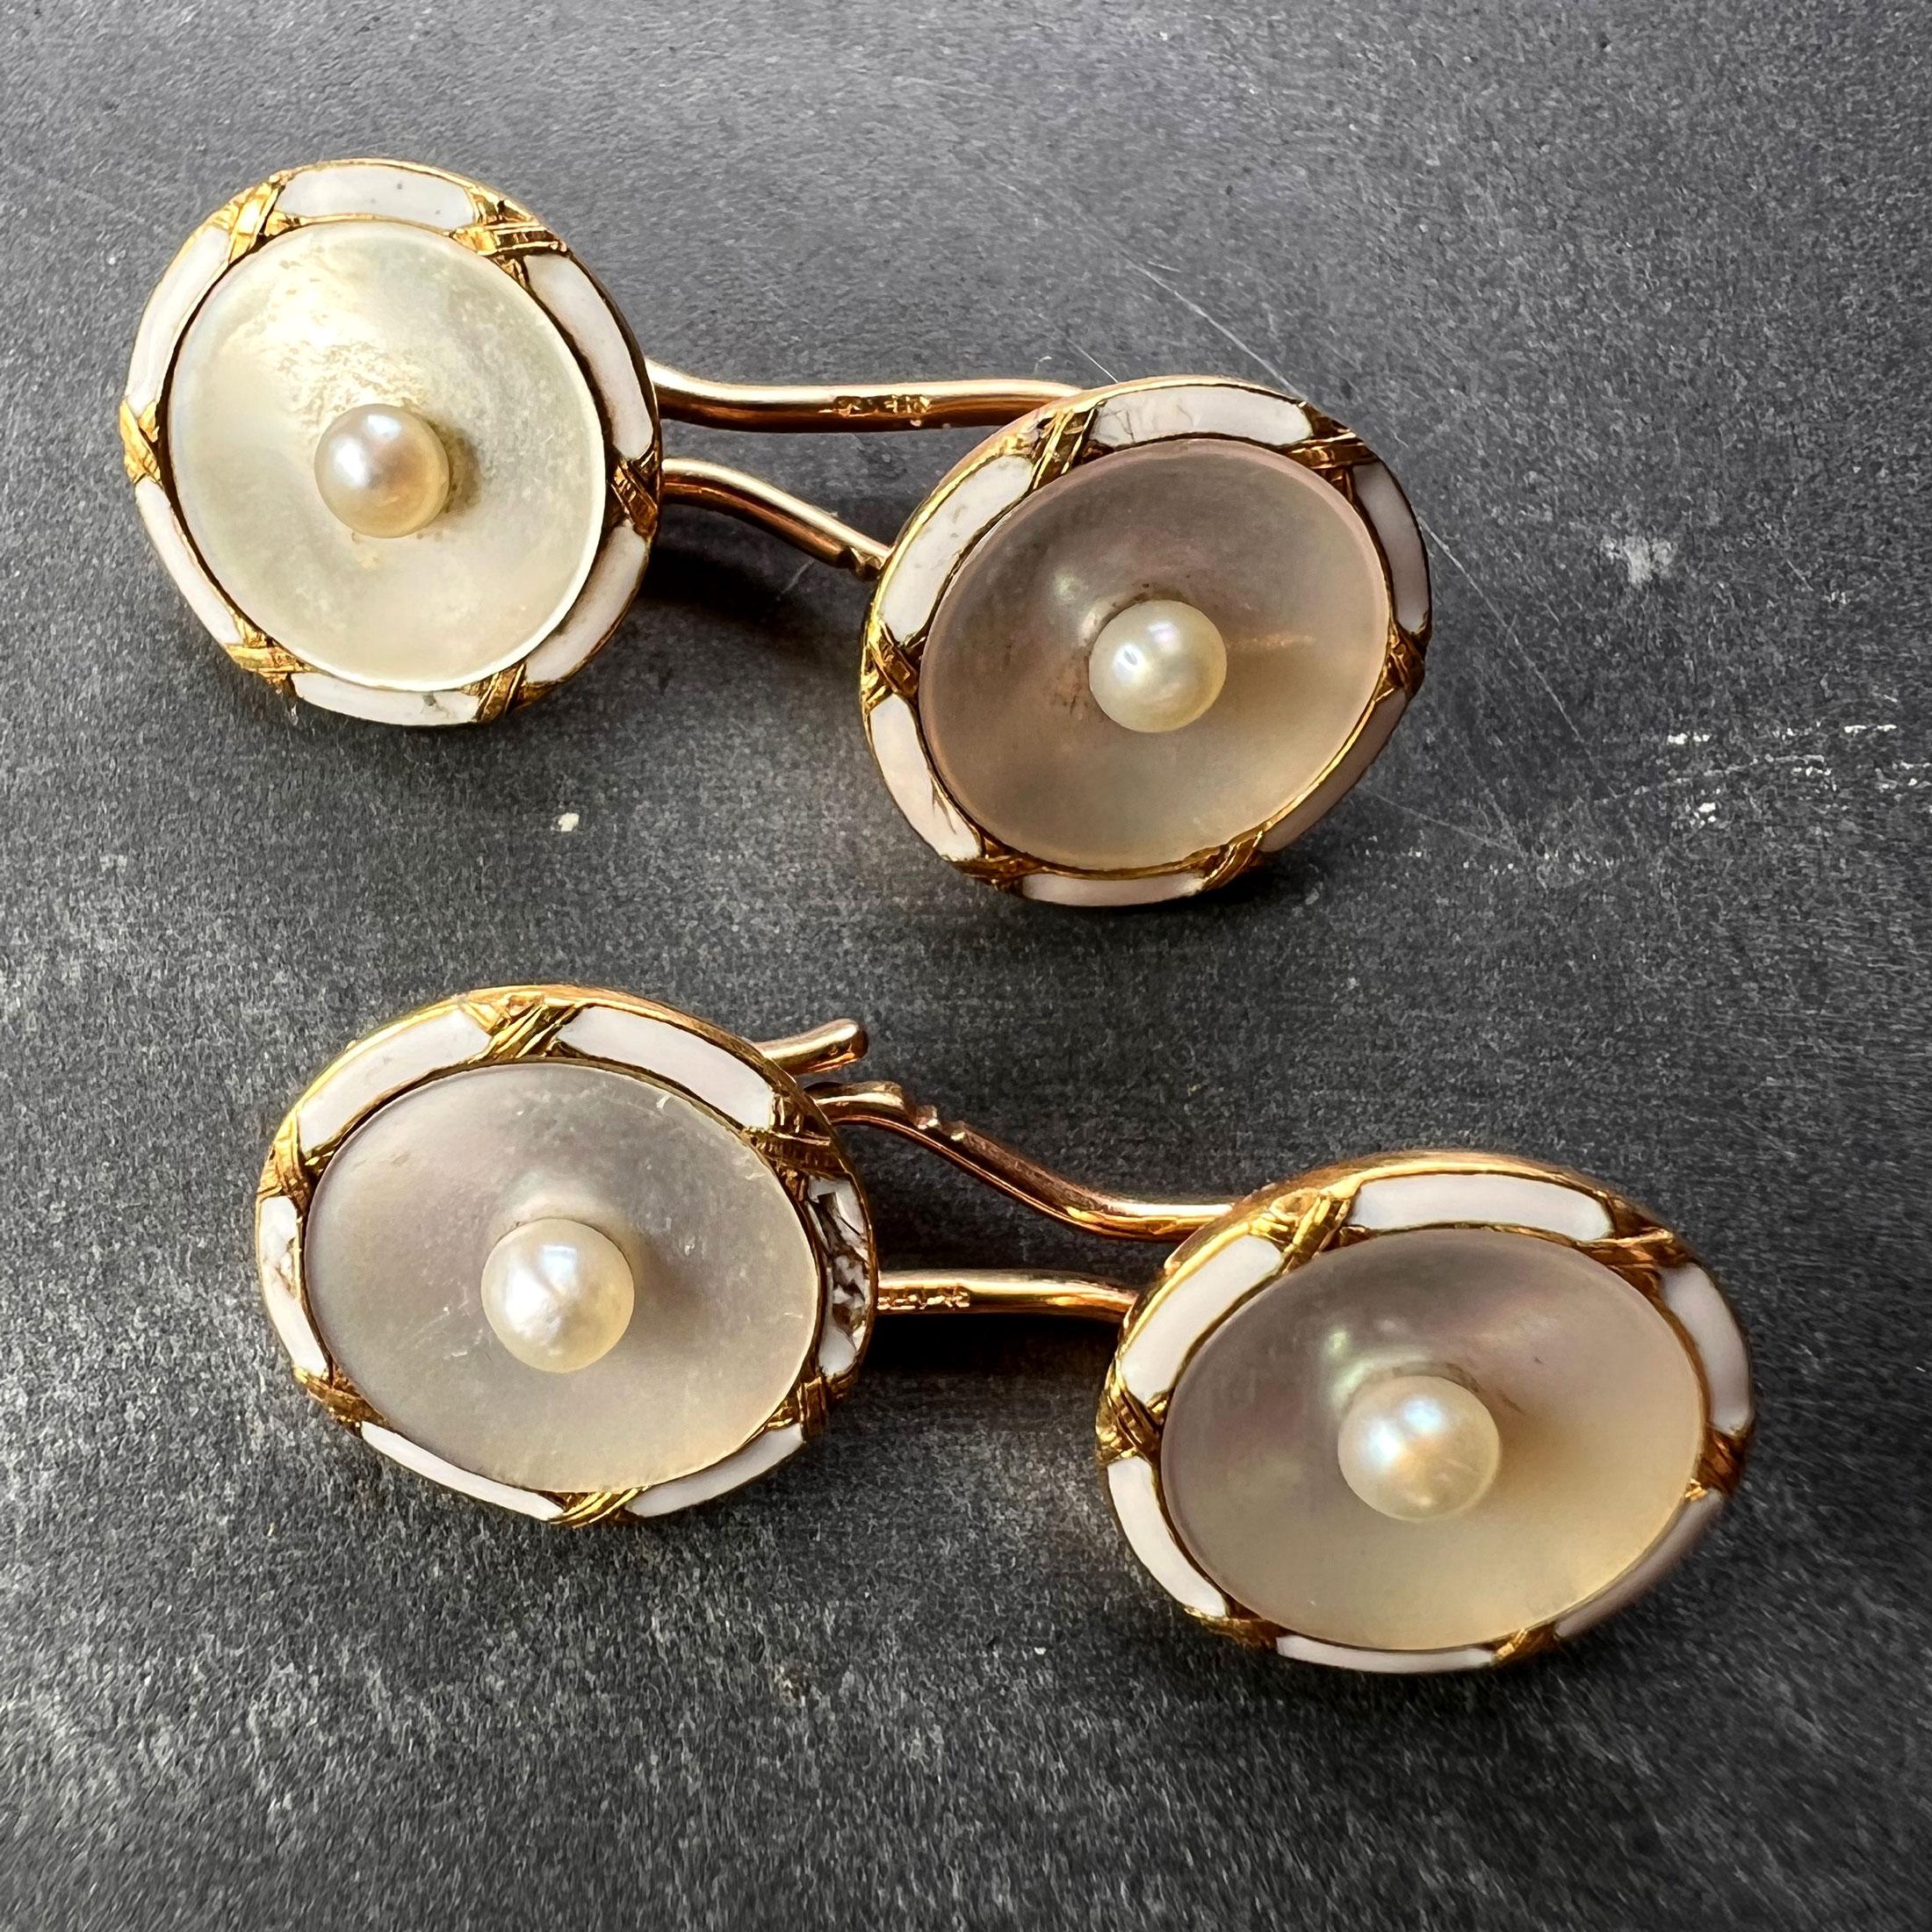 Uncut French 18k Yellow Gold Pearl, Mother of Pearl and Enamel Cufflinks